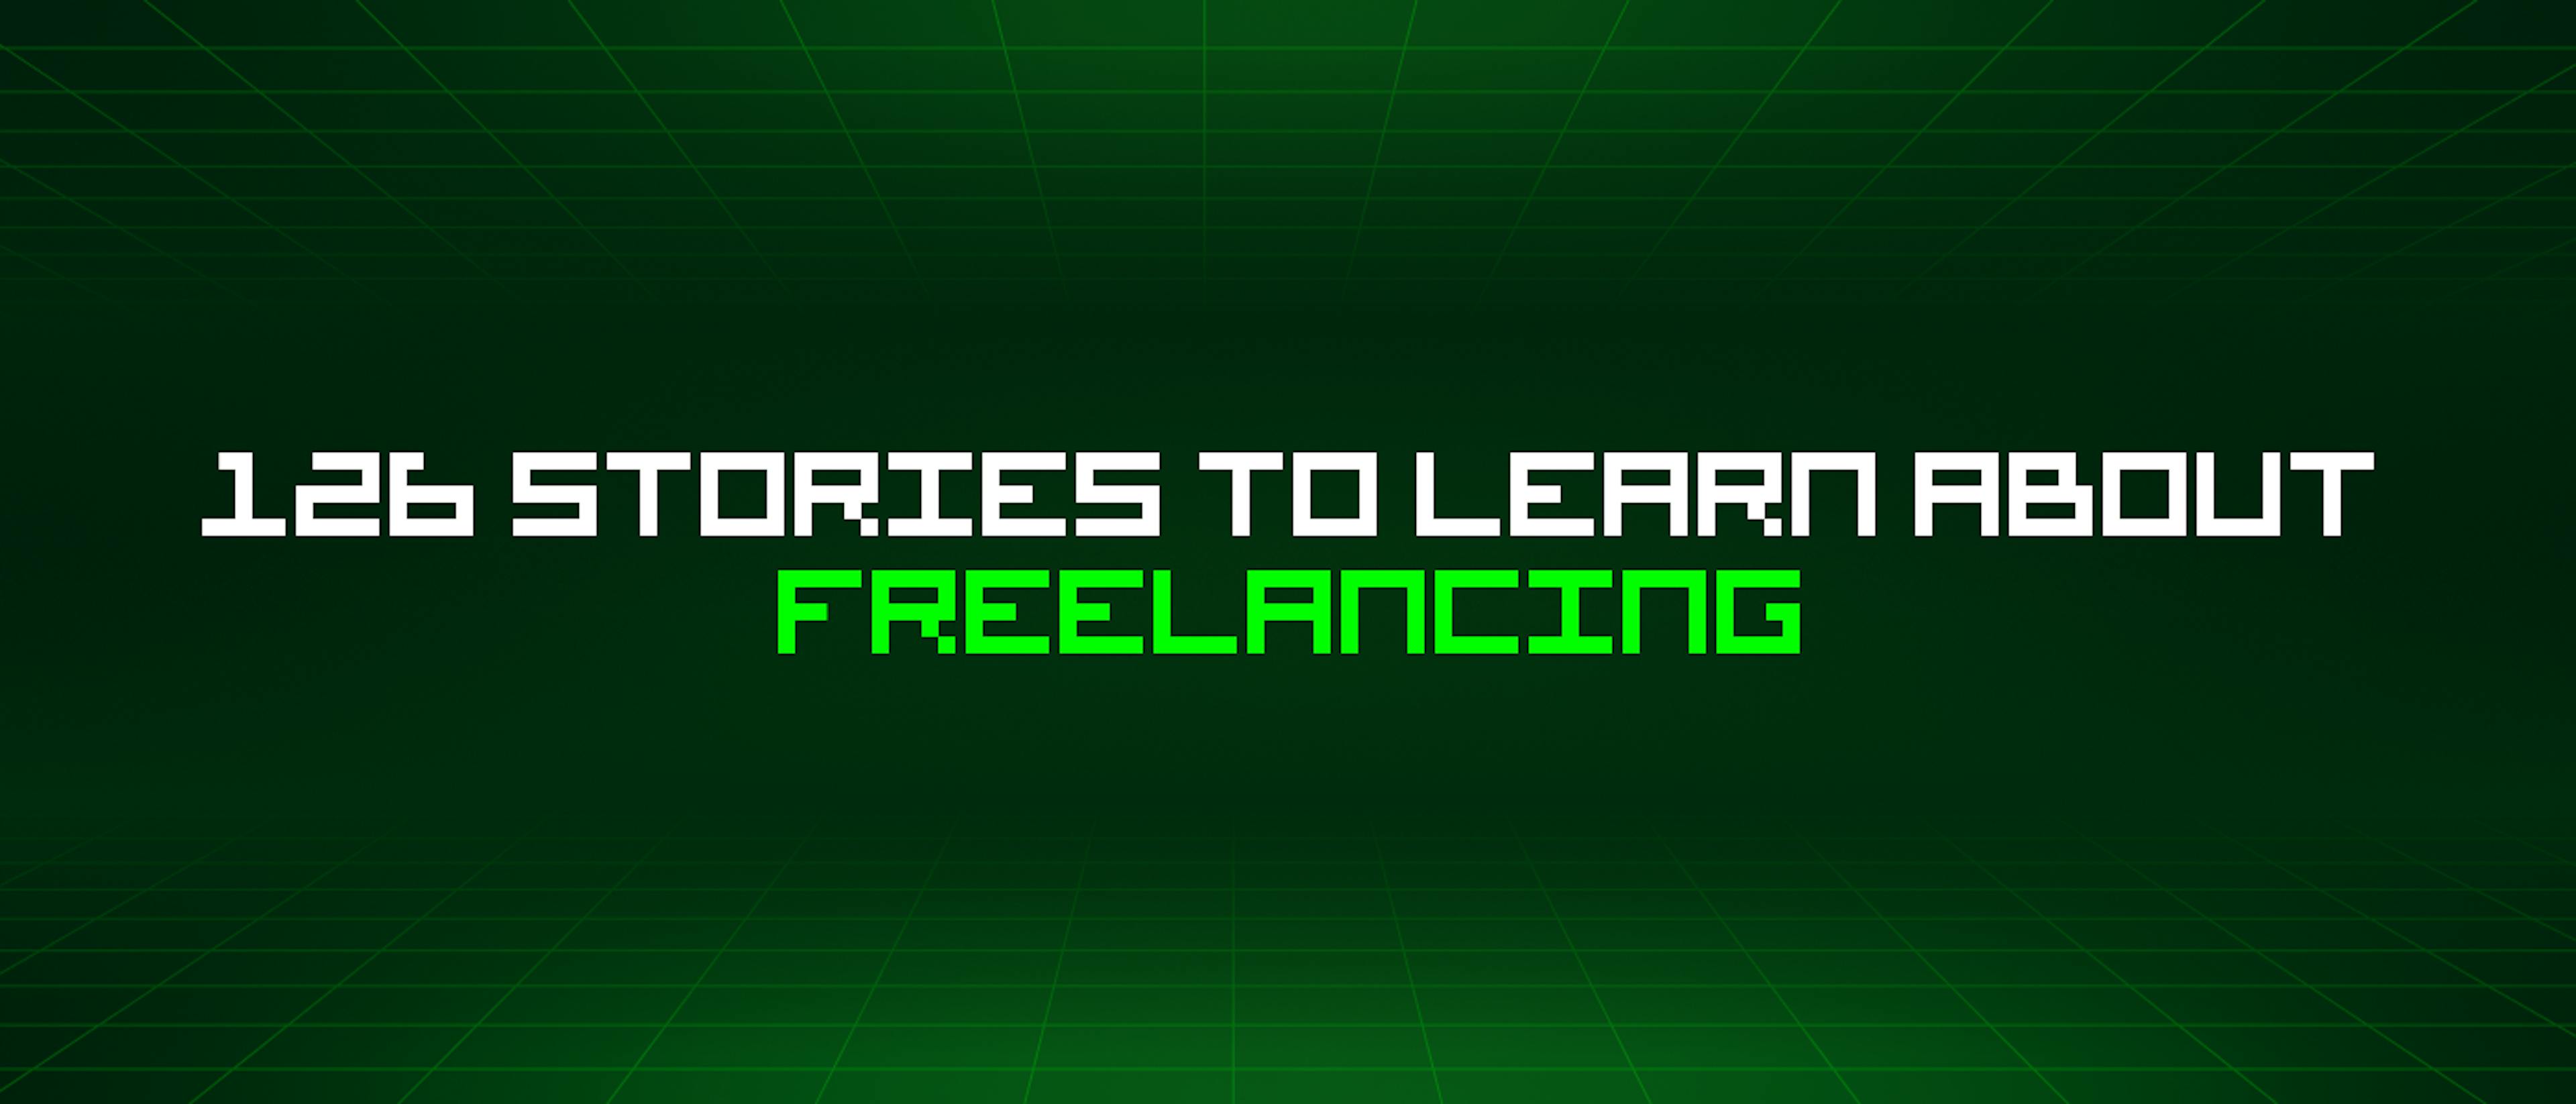 featured image - 126 Stories To Learn About Freelancing